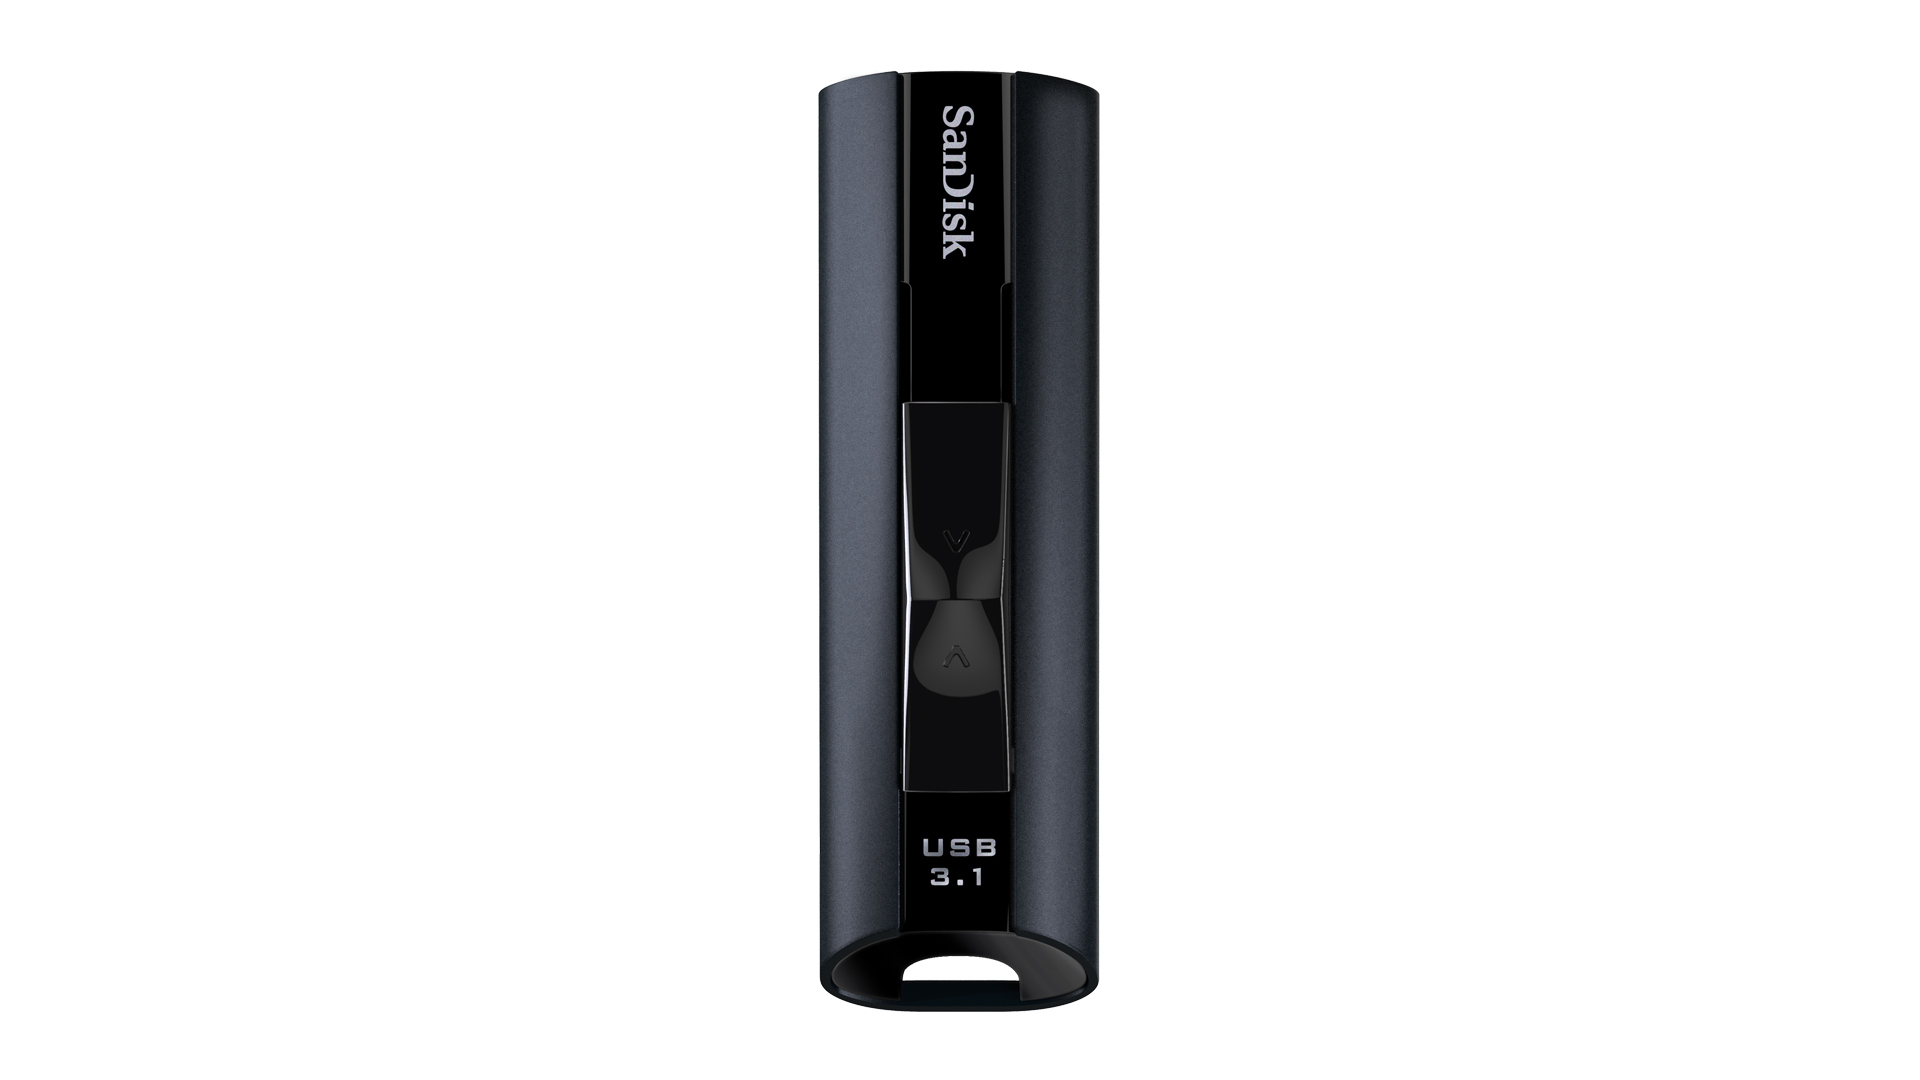 Sandisk Launches Its Fastest High Capacity Usb Flash Drive Ever